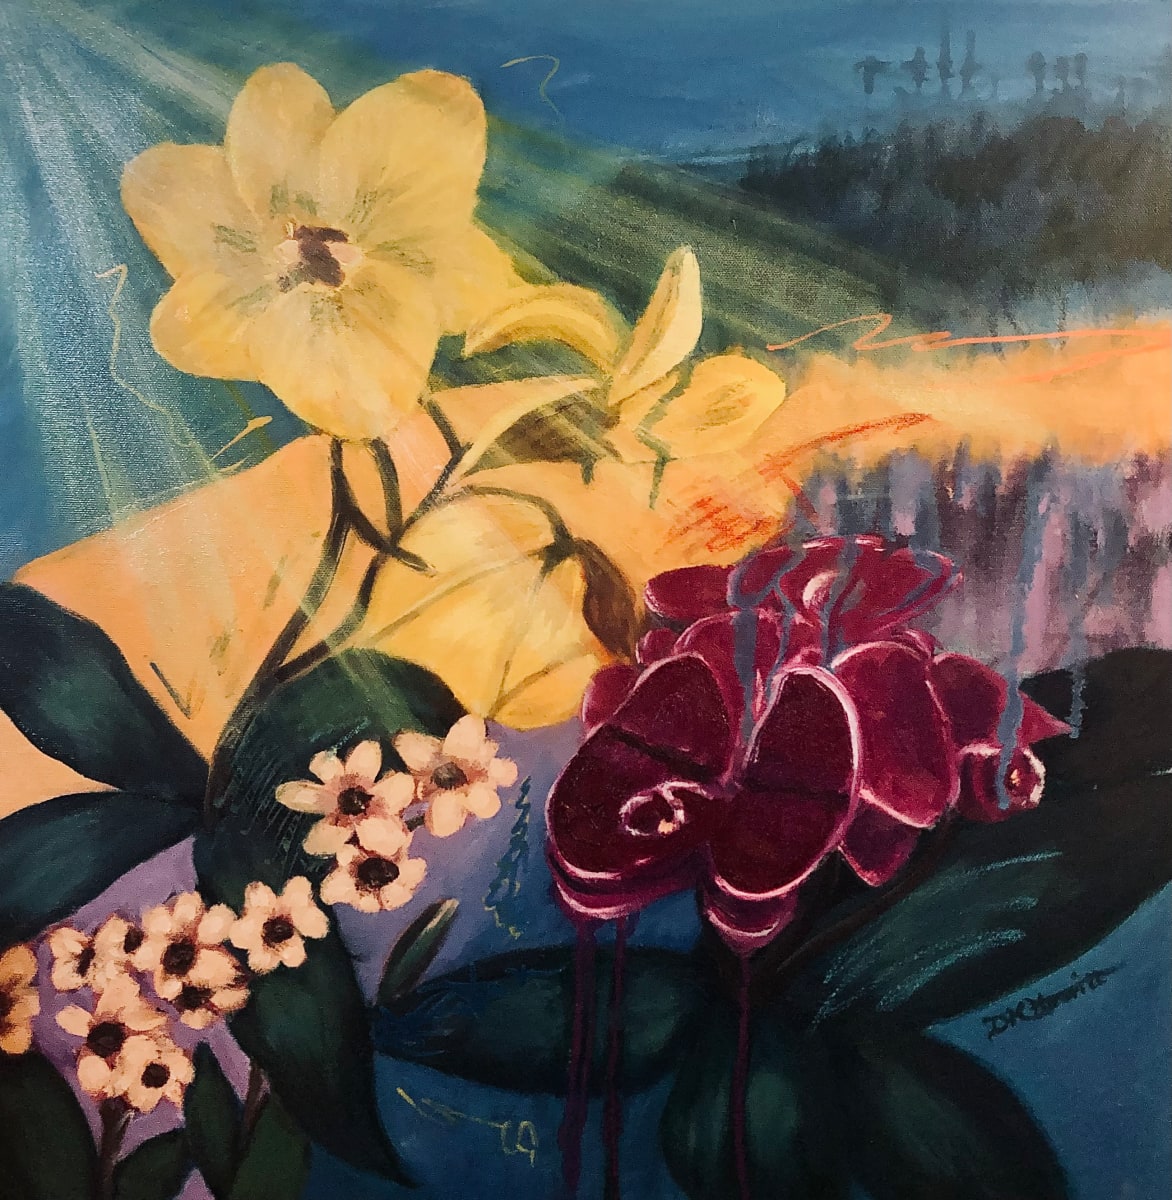 Vibrant Ascension by Diane K. Hewitt  Image: Orchids Grow On A Magical Mountainside In This Fantasy Abstract Landscape Oil Painting Titled ‘Vibrant Ascension’ By Georgia Contemporary Artist Diane K. Hewitt 